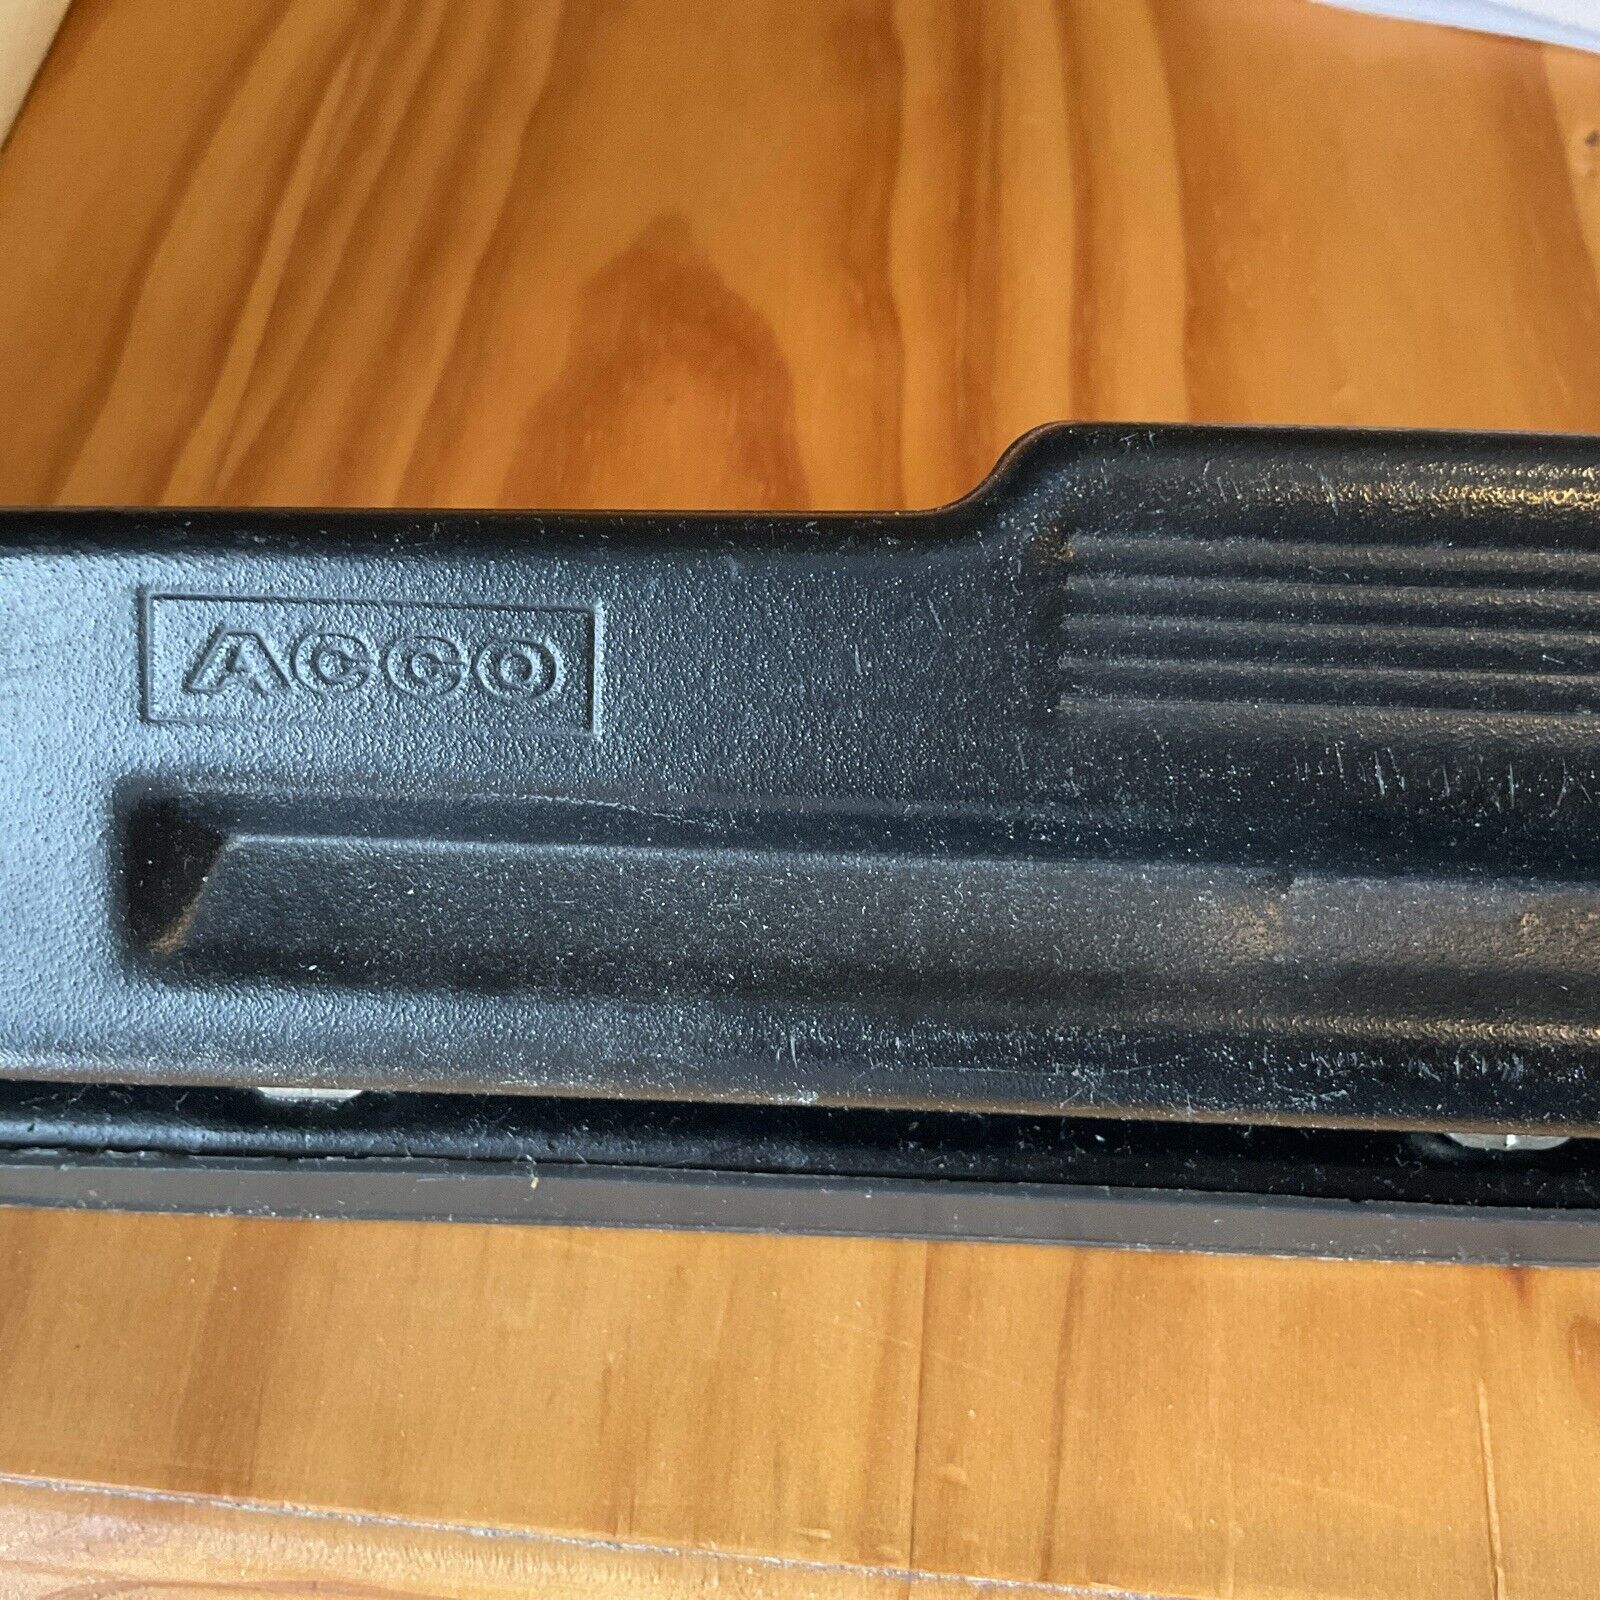 ACCO VINTAGE ADJUSTABLE 3 HOLE METAL PUNCH RULER PAPER TRAY